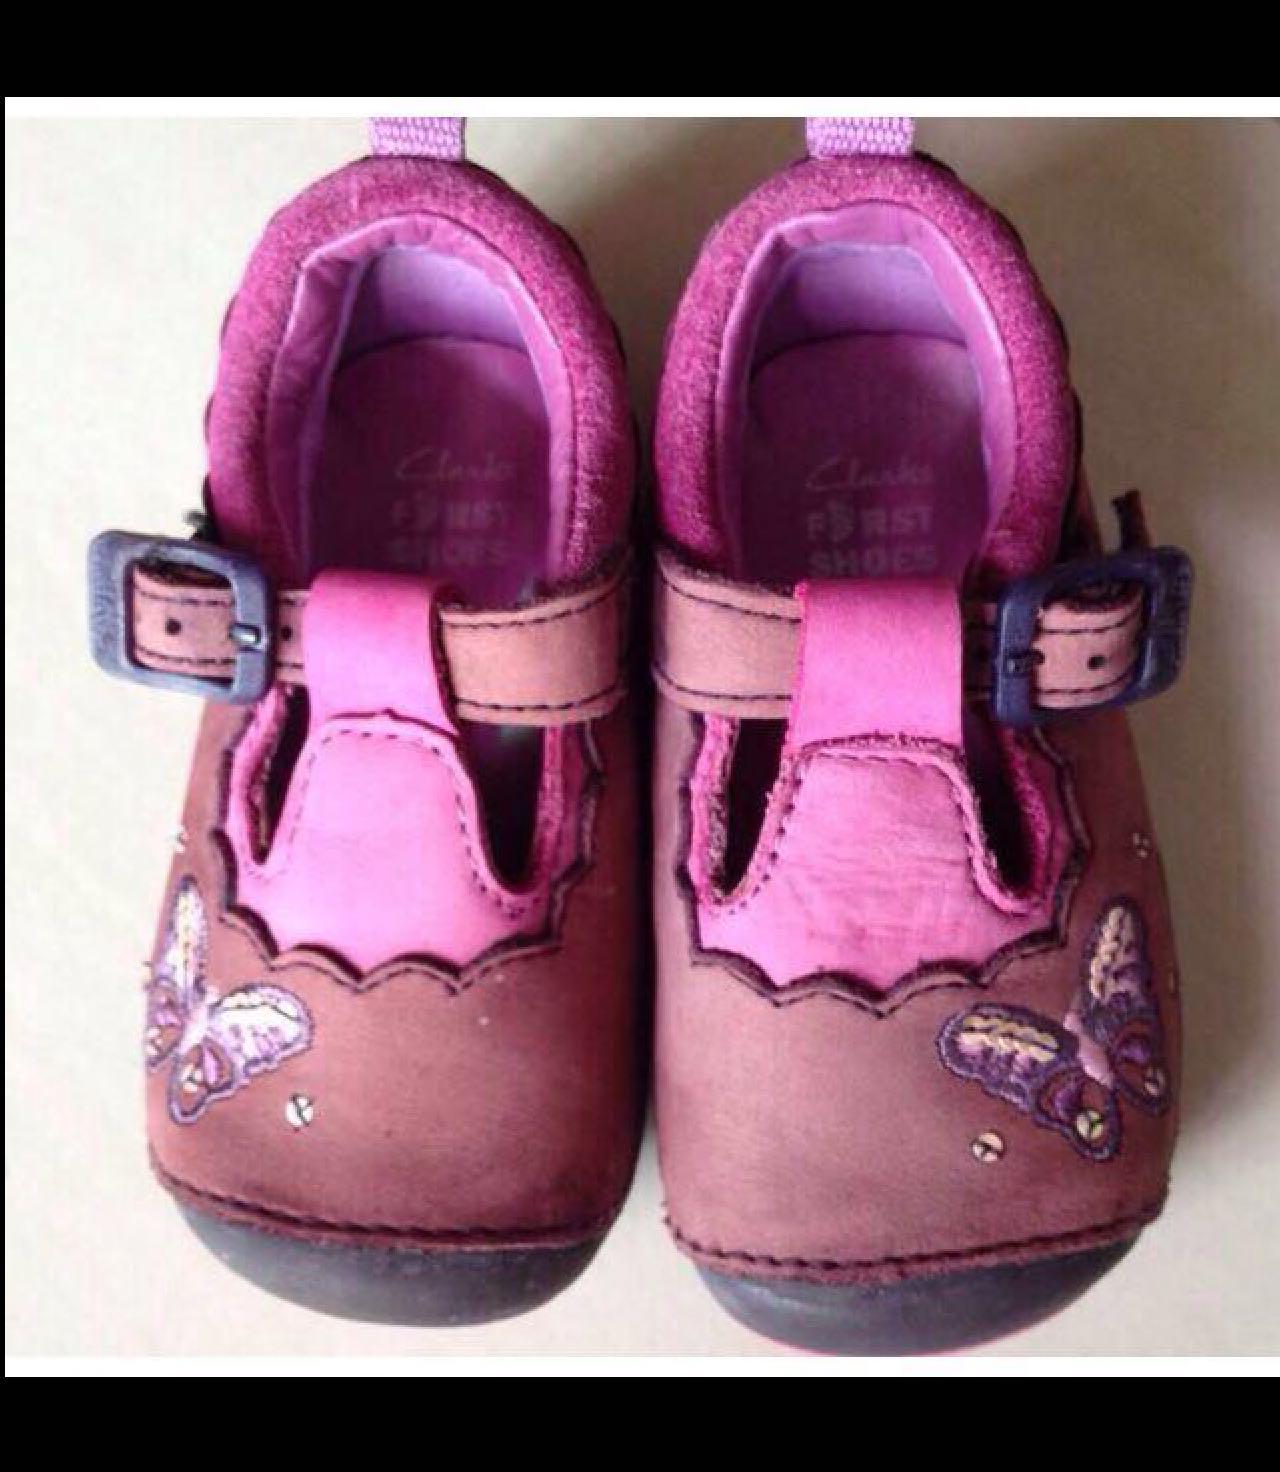 clarks butterfly shoes